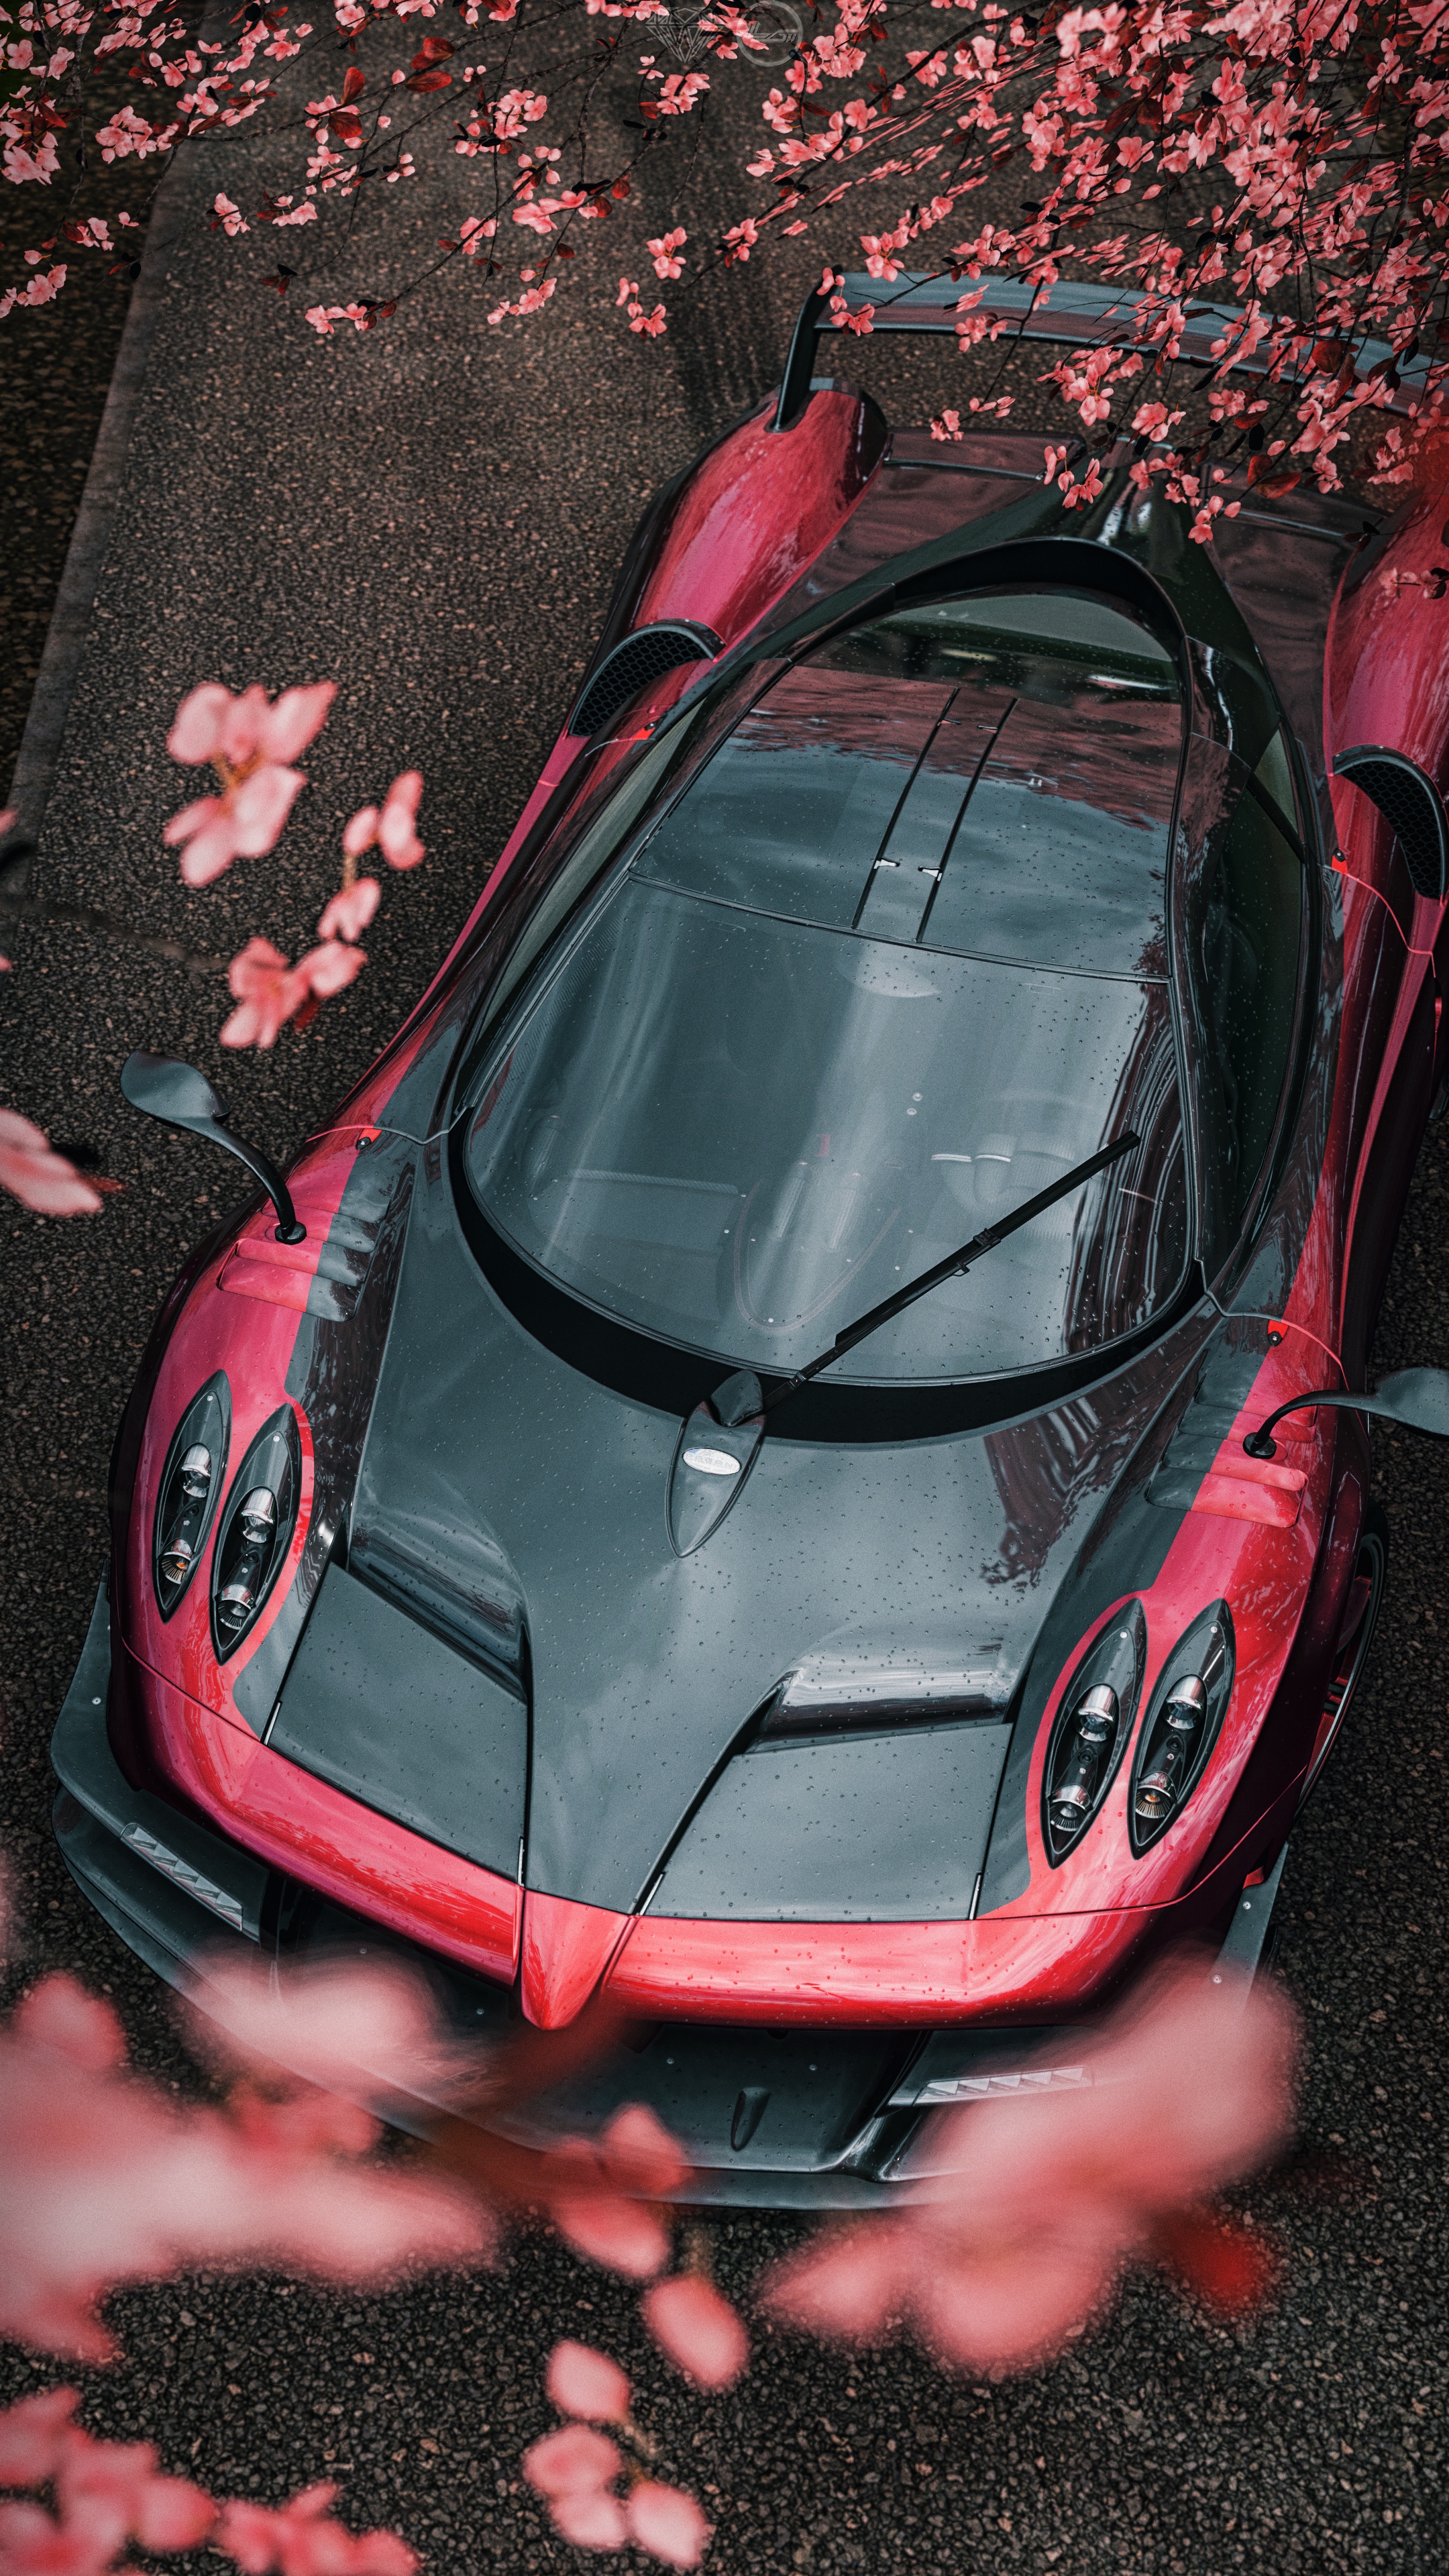 vertical wallpaper sports car, cars, sports, flowers, view from above, car, machine